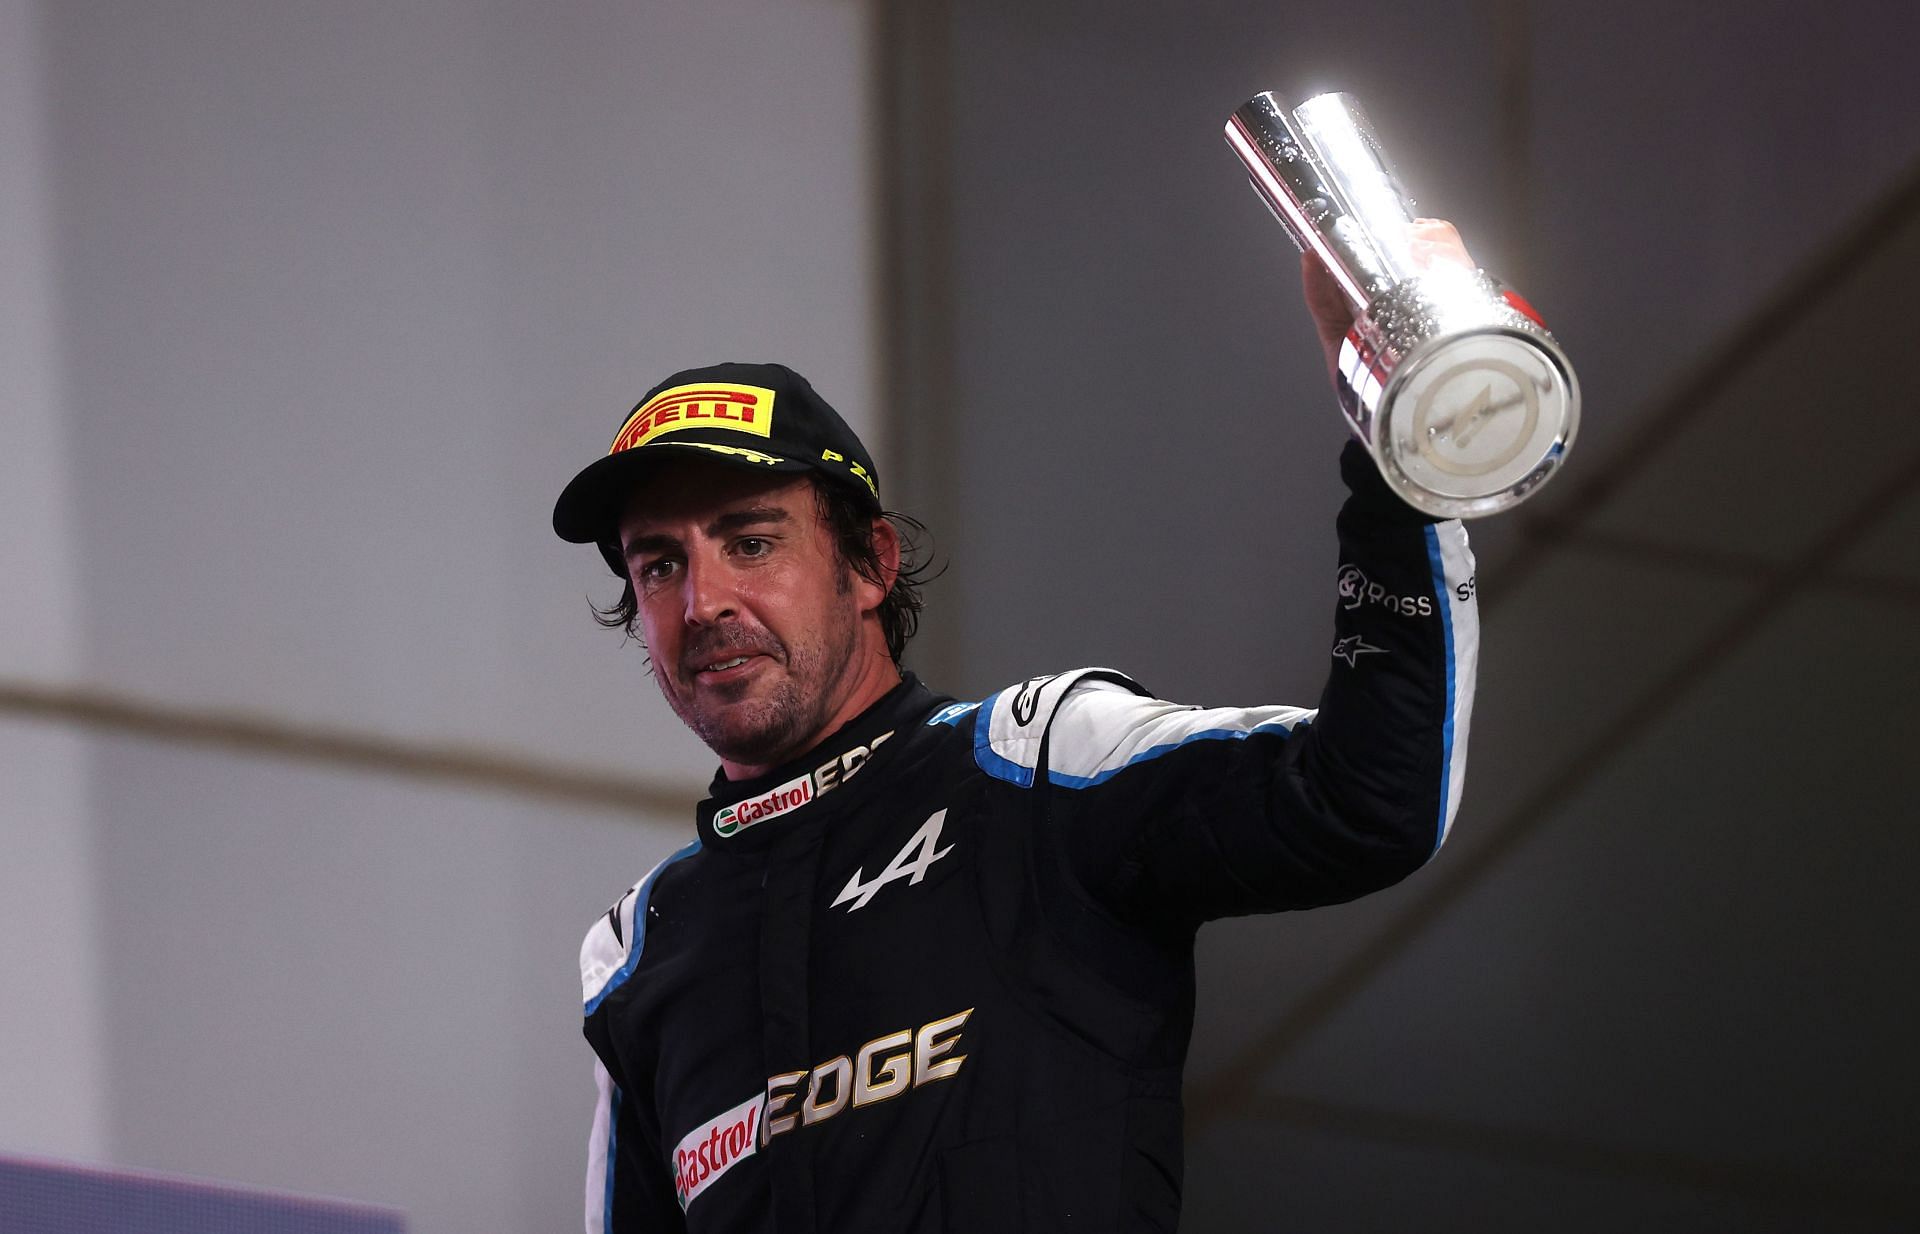 Fernando Alonso is truly the elite of the elites in F1